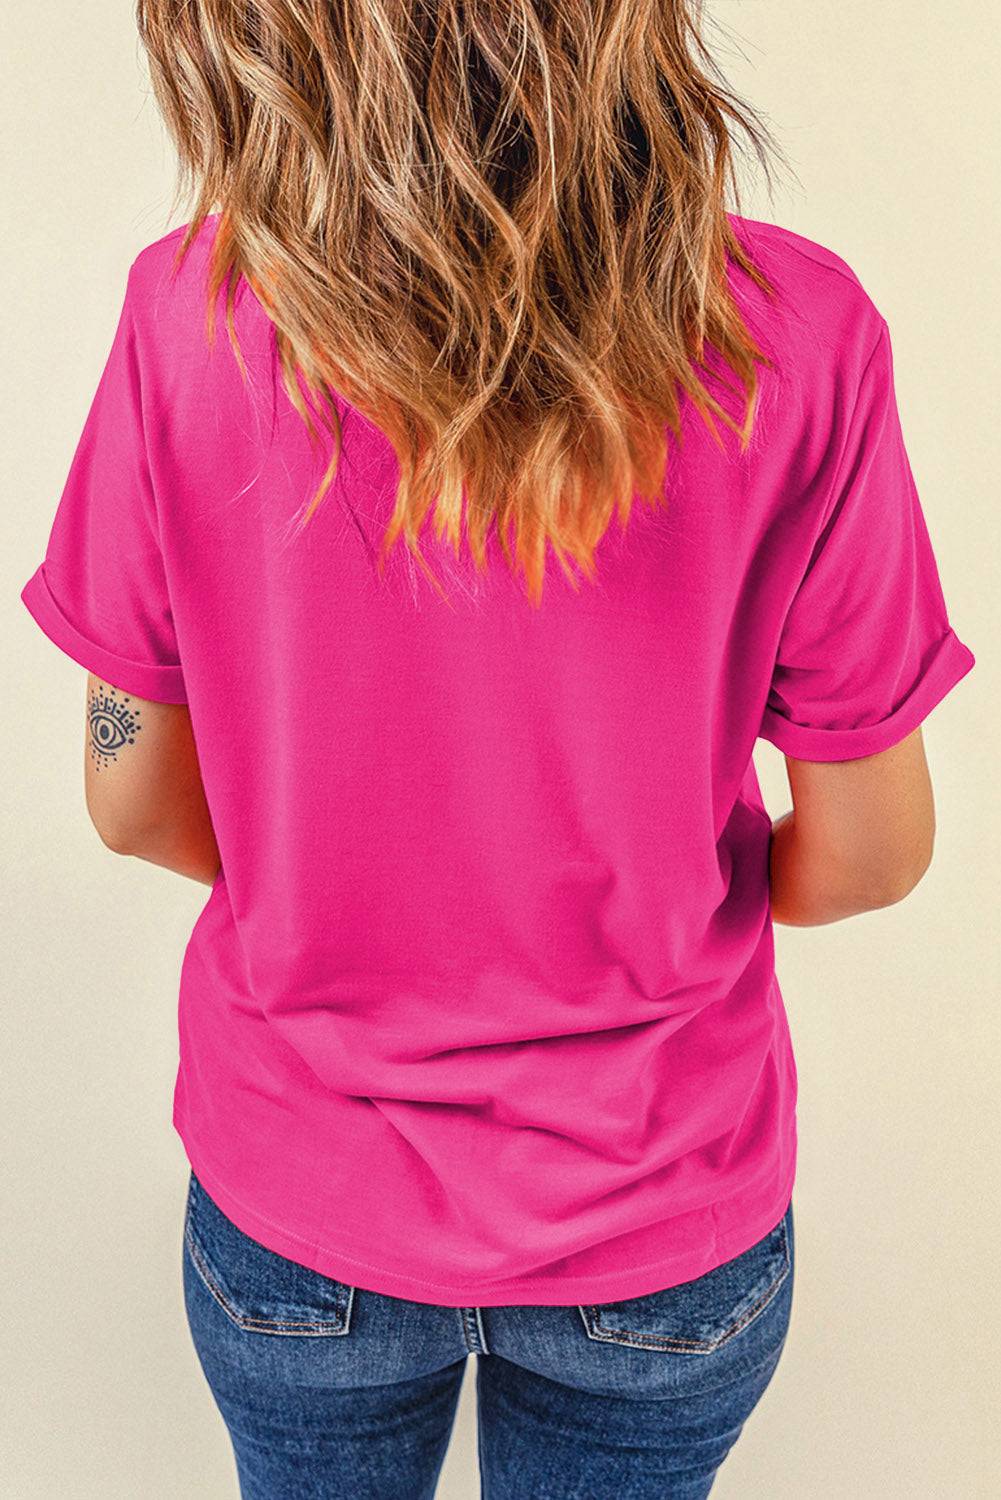 the back of a woman's pink shirt